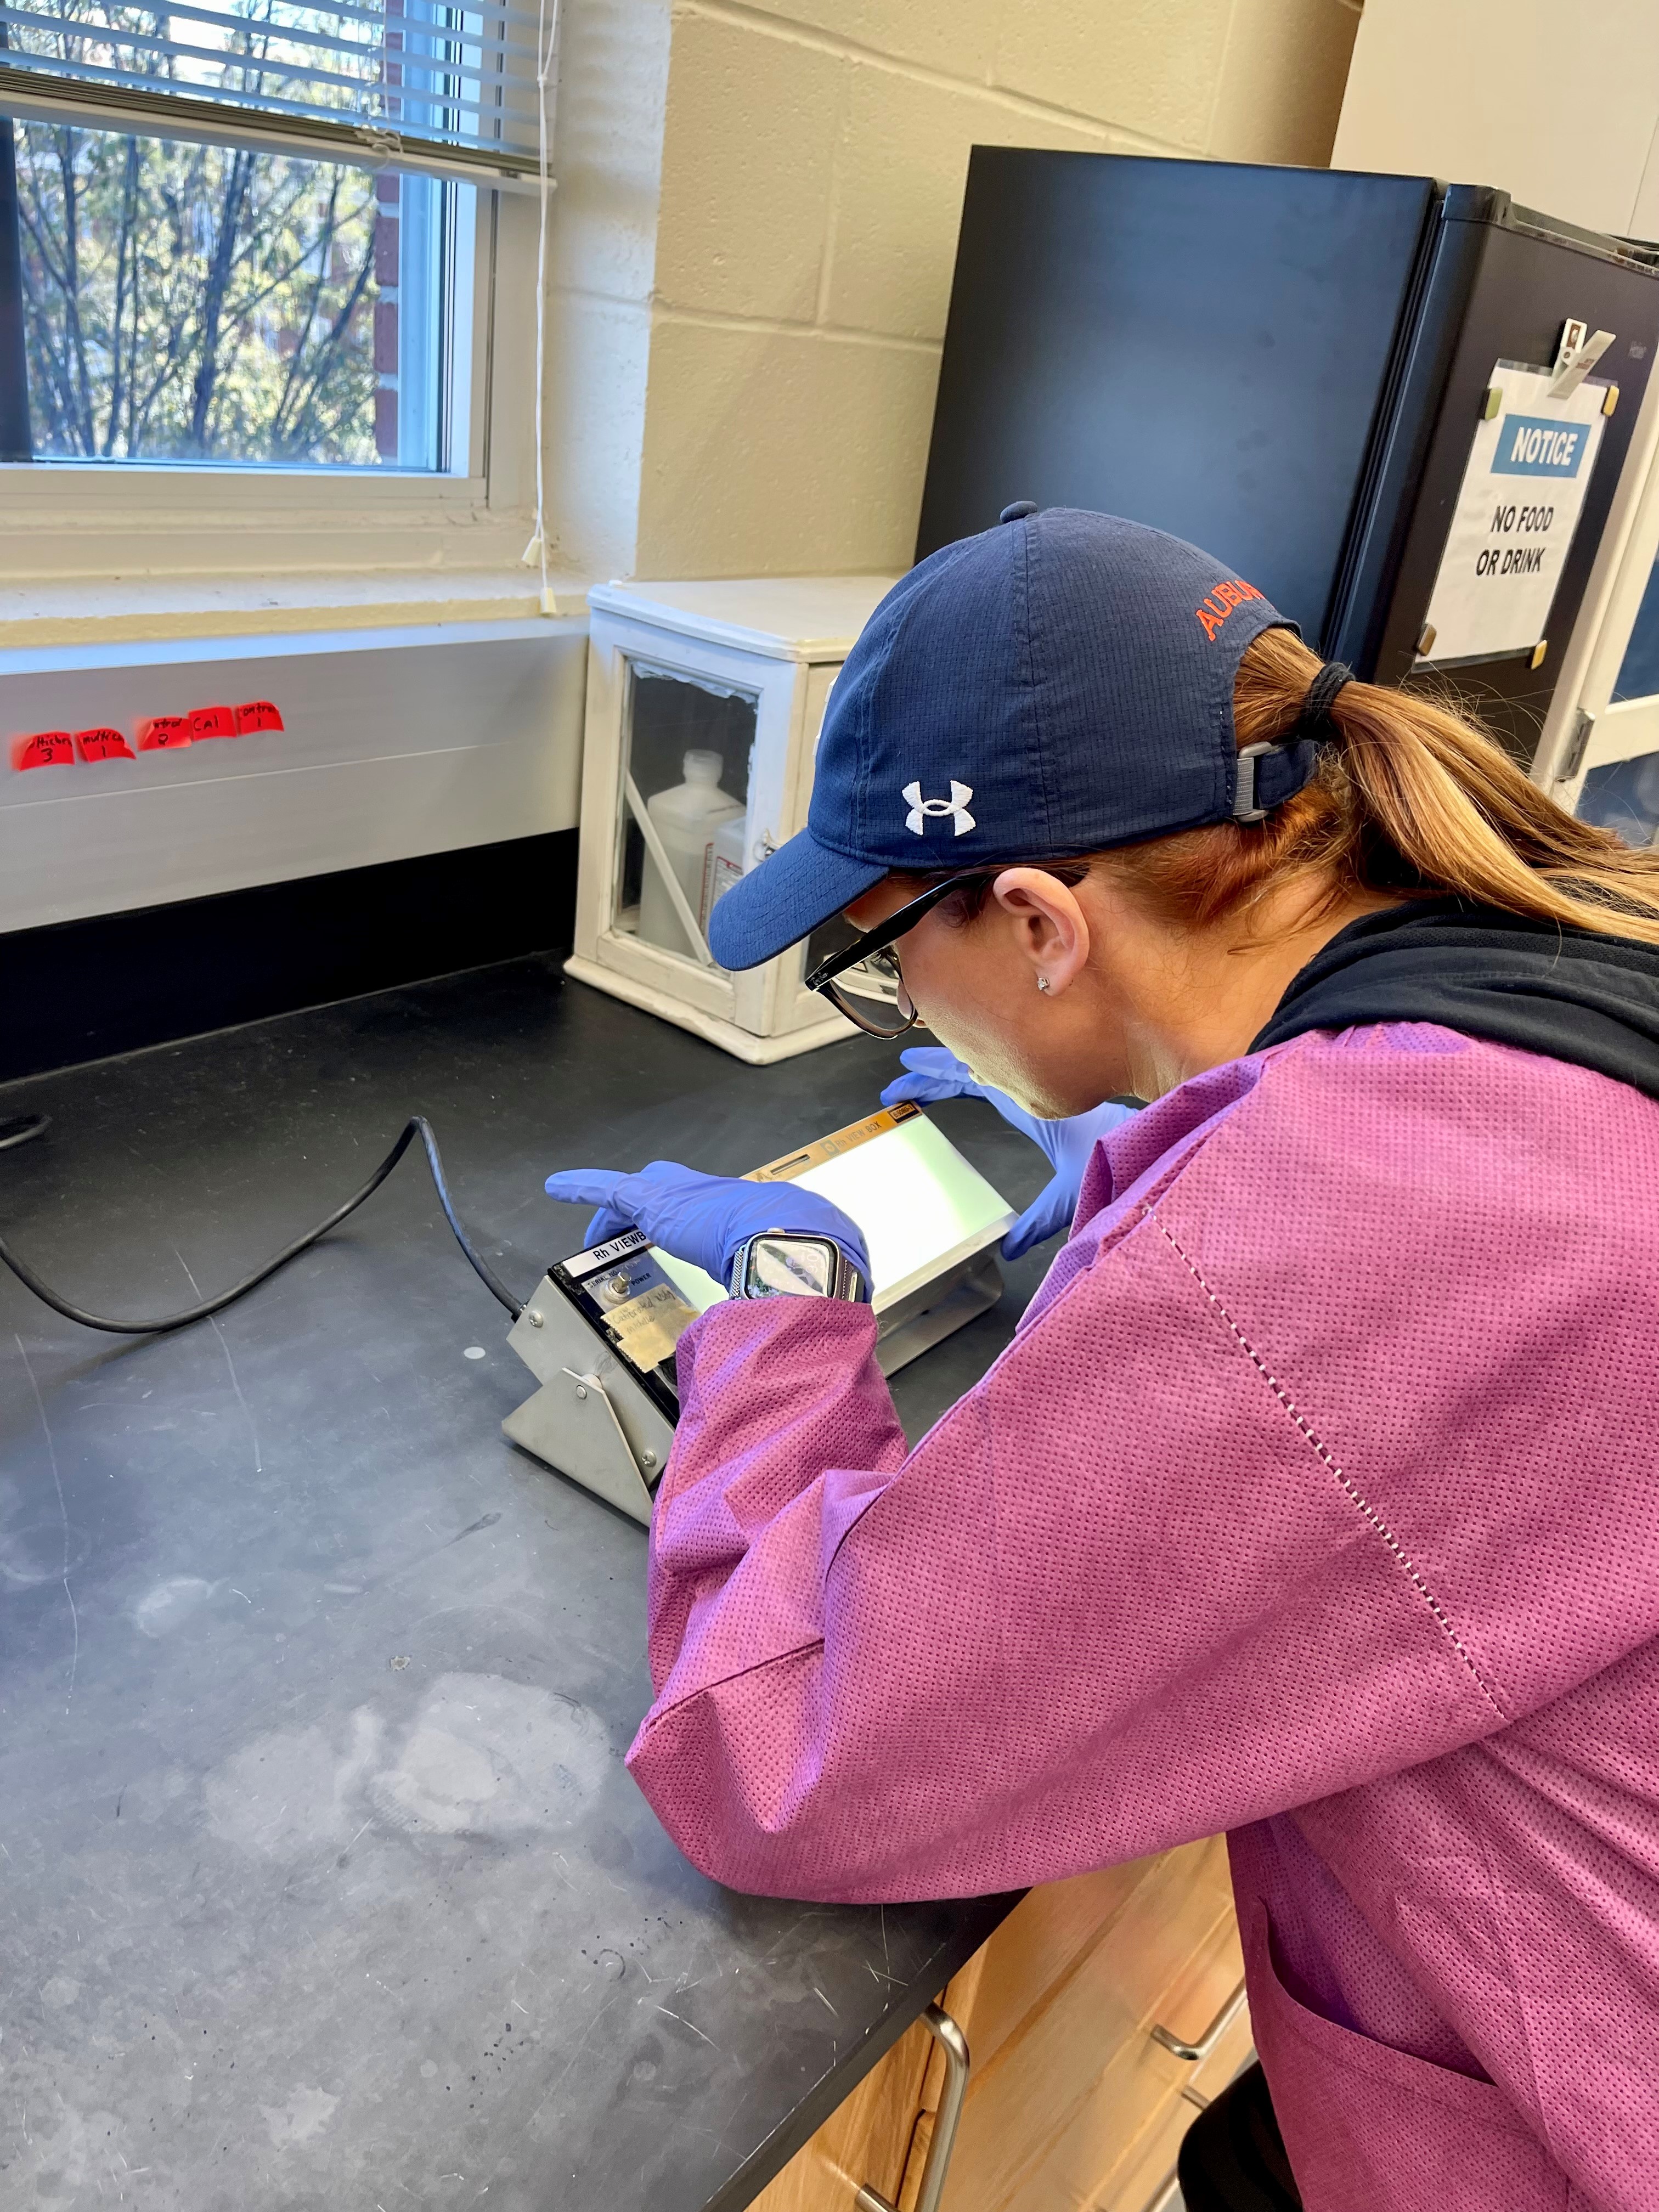 Sarah Chaplain looks at the sample under a light to determine if it is positive or negative.